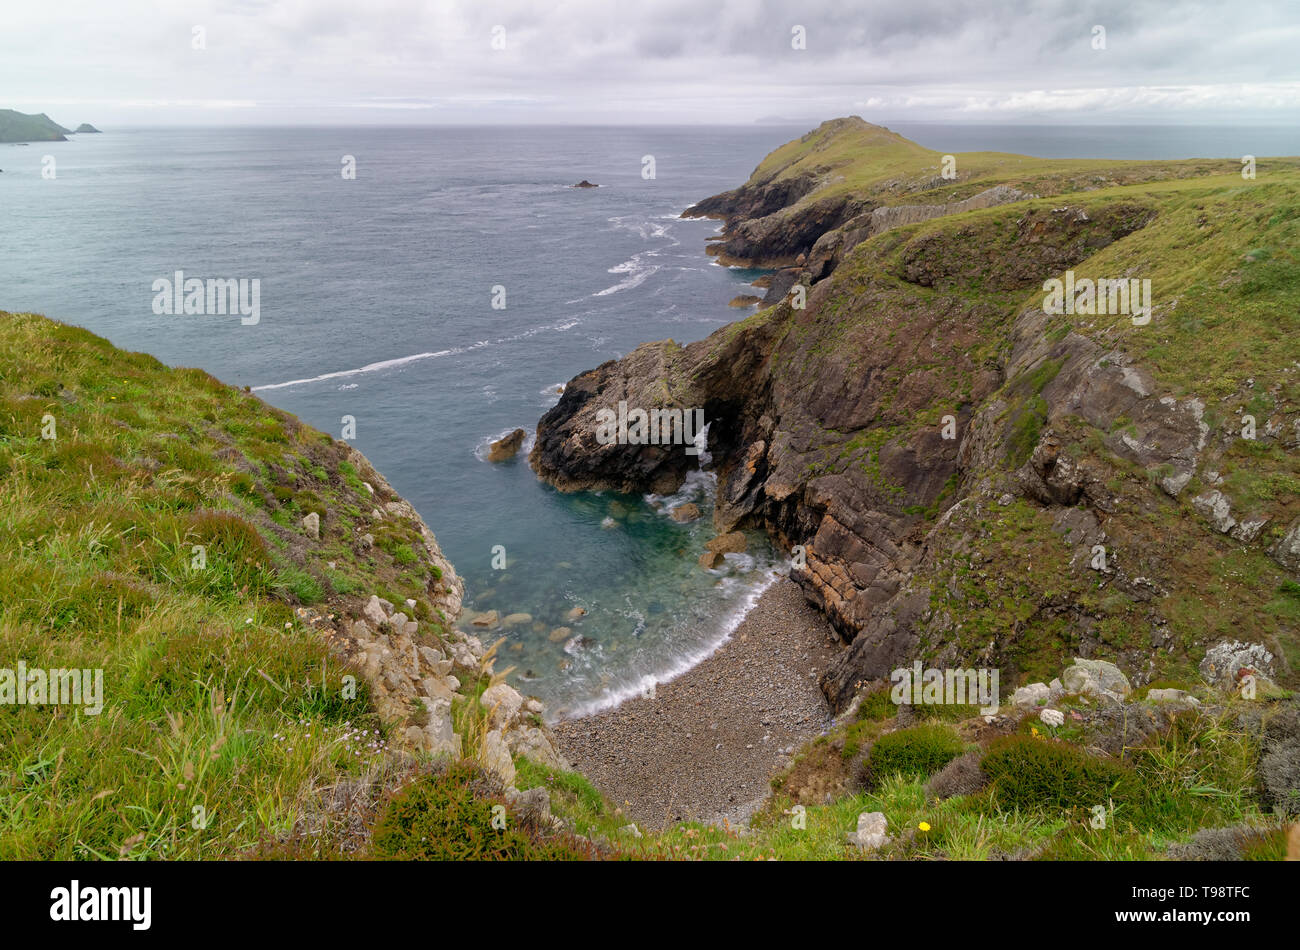 Wooltack Point, as seen from the Marloes Sands coastal walk, part of the Pembrokeshire Coast Path in Wales Stock Photo